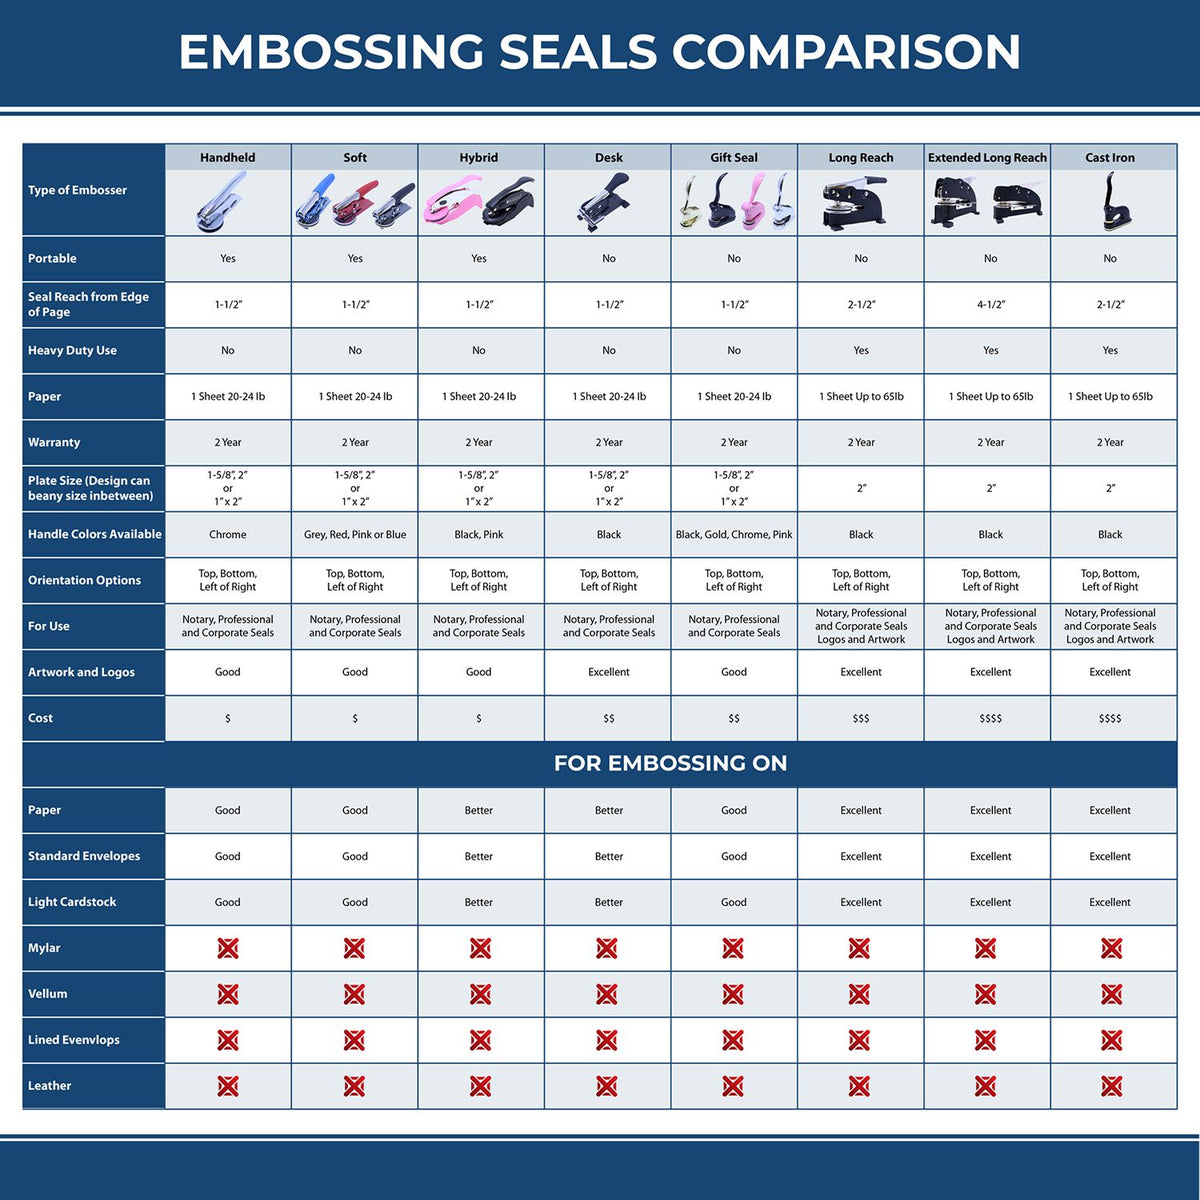 A comparison chart for the different types of mount models available for the Extended Long Reach Tennessee Architect Seal Embosser.